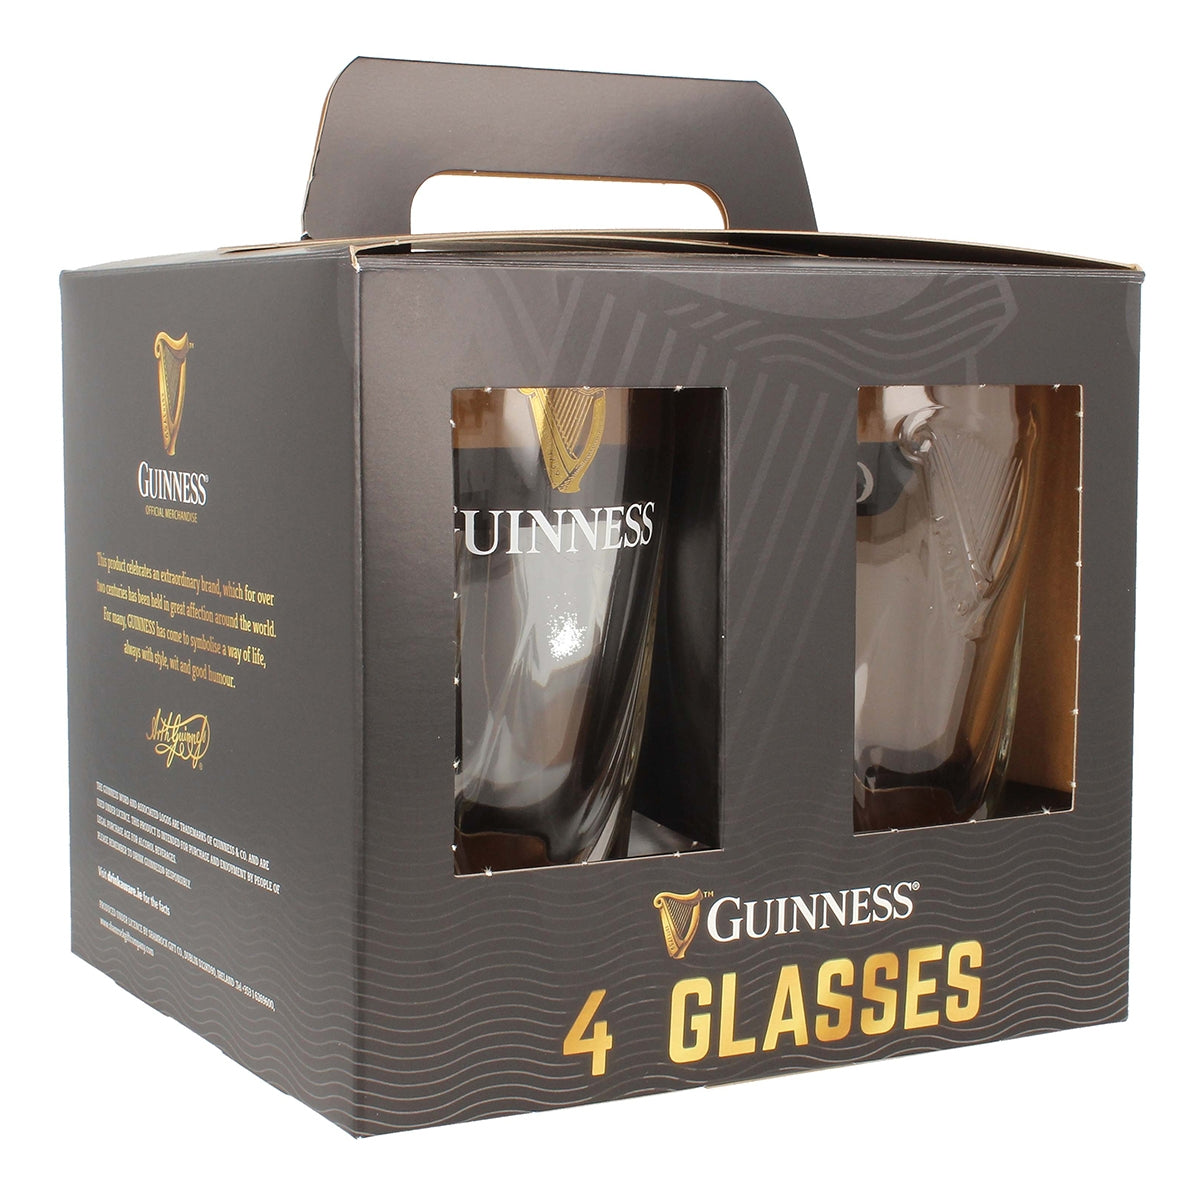 Guinness Pint Glass 4 Pack in a gift box.